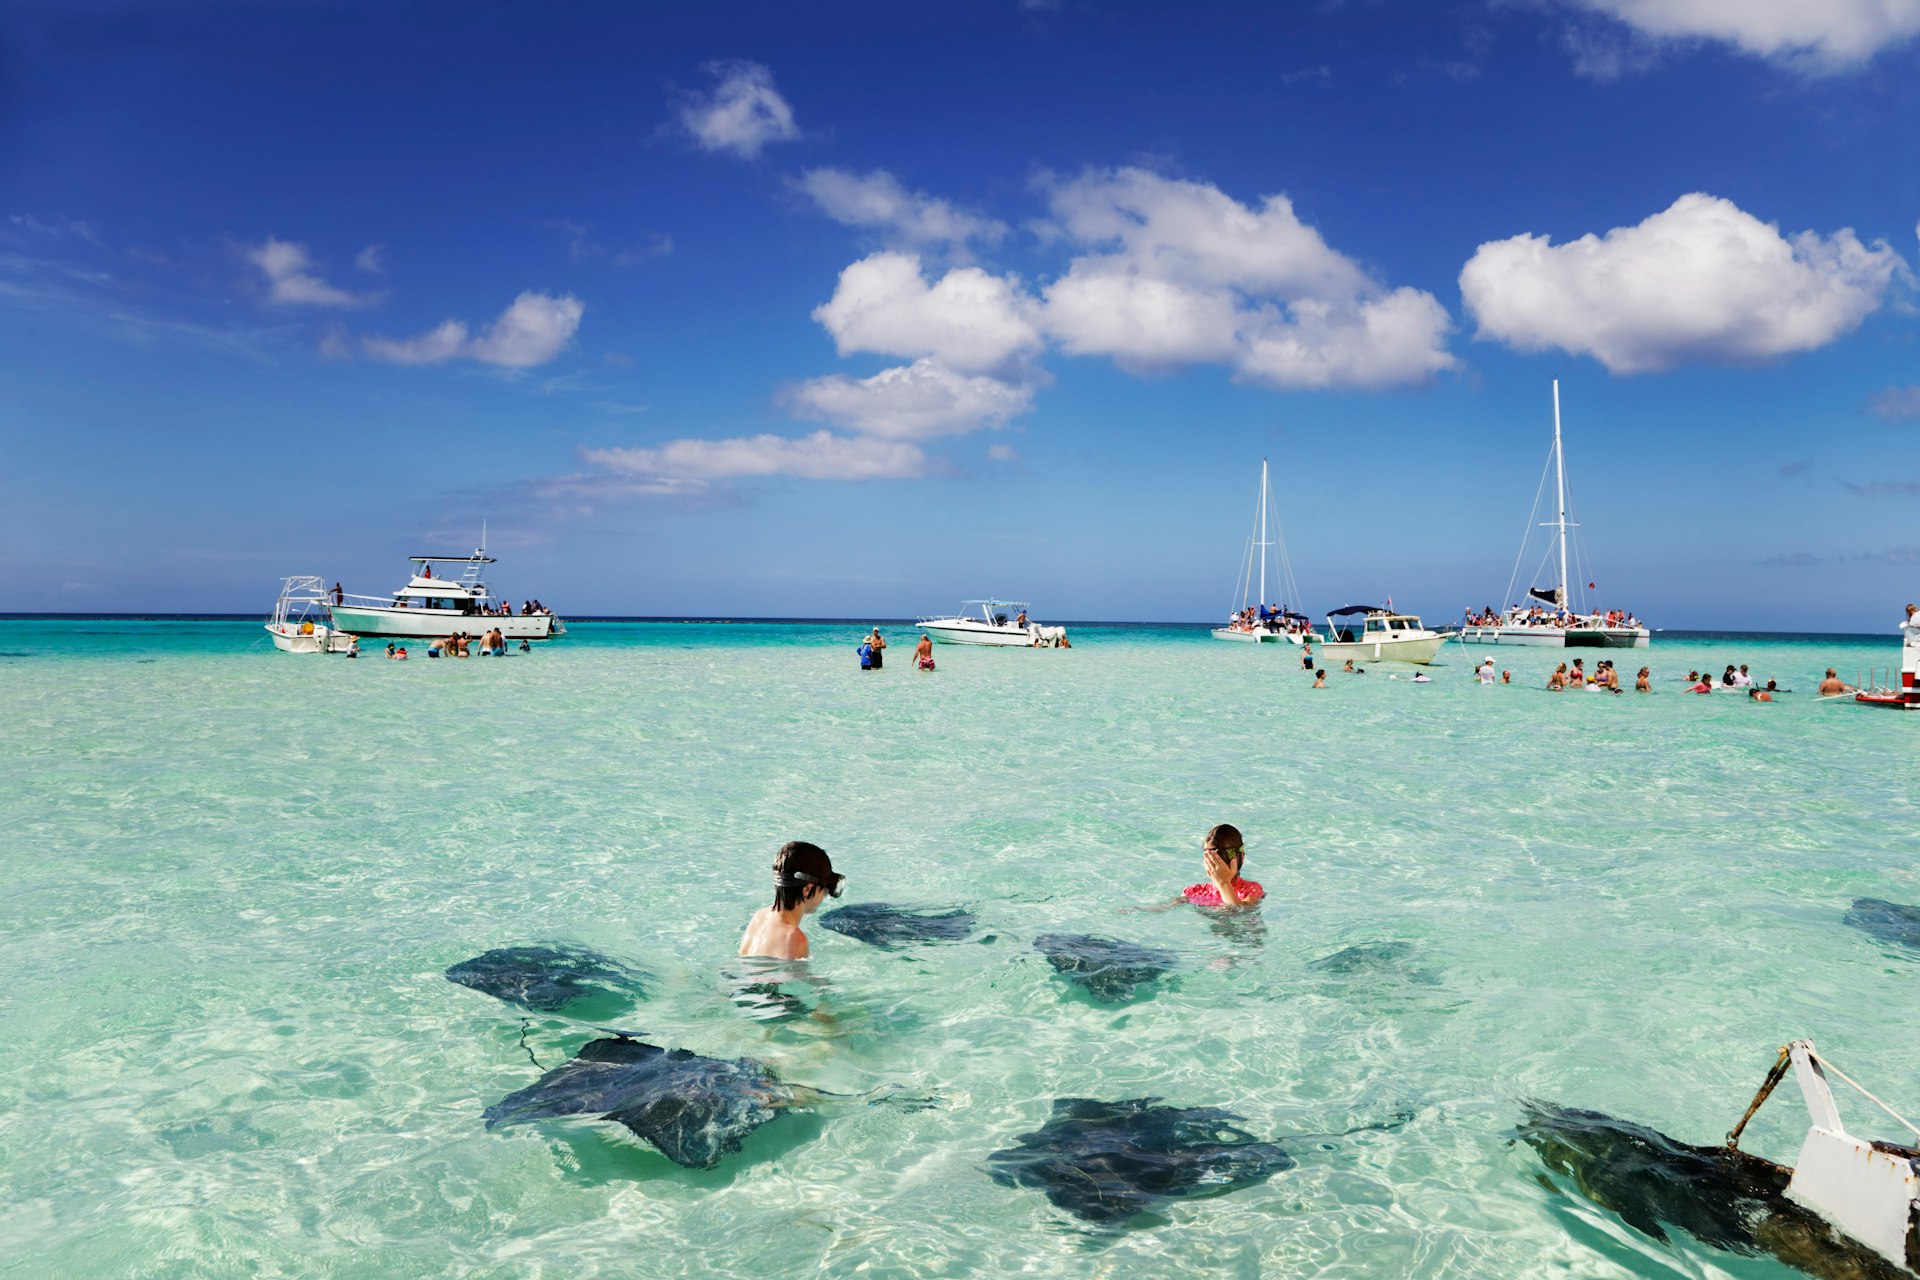 Two snorkelers pictured swimming with stingrays and sailboats in the distance